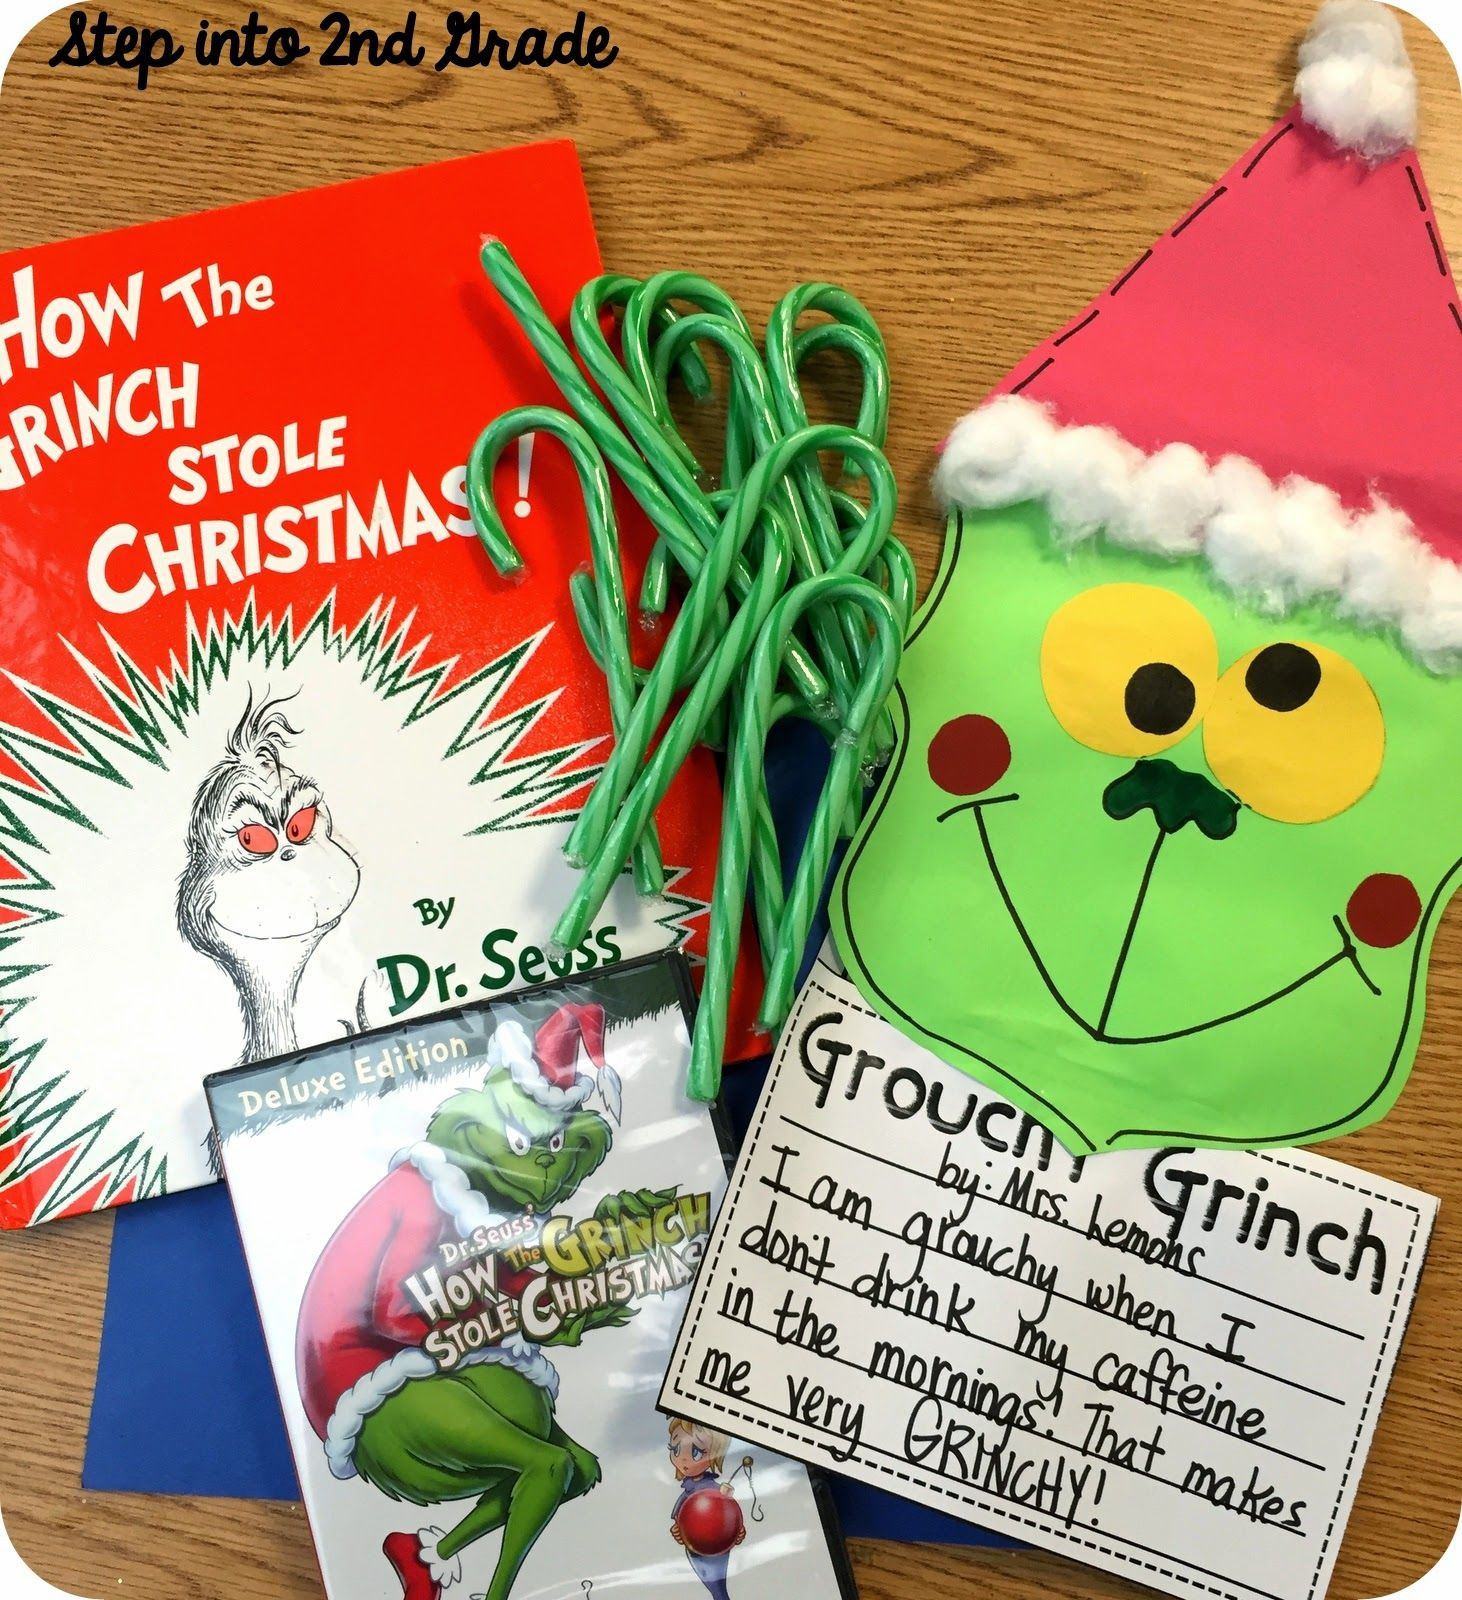 1St Grade Christmas Party Ideas
 Step into 2nd Grade with Mrs Lemons A Whole Lotta